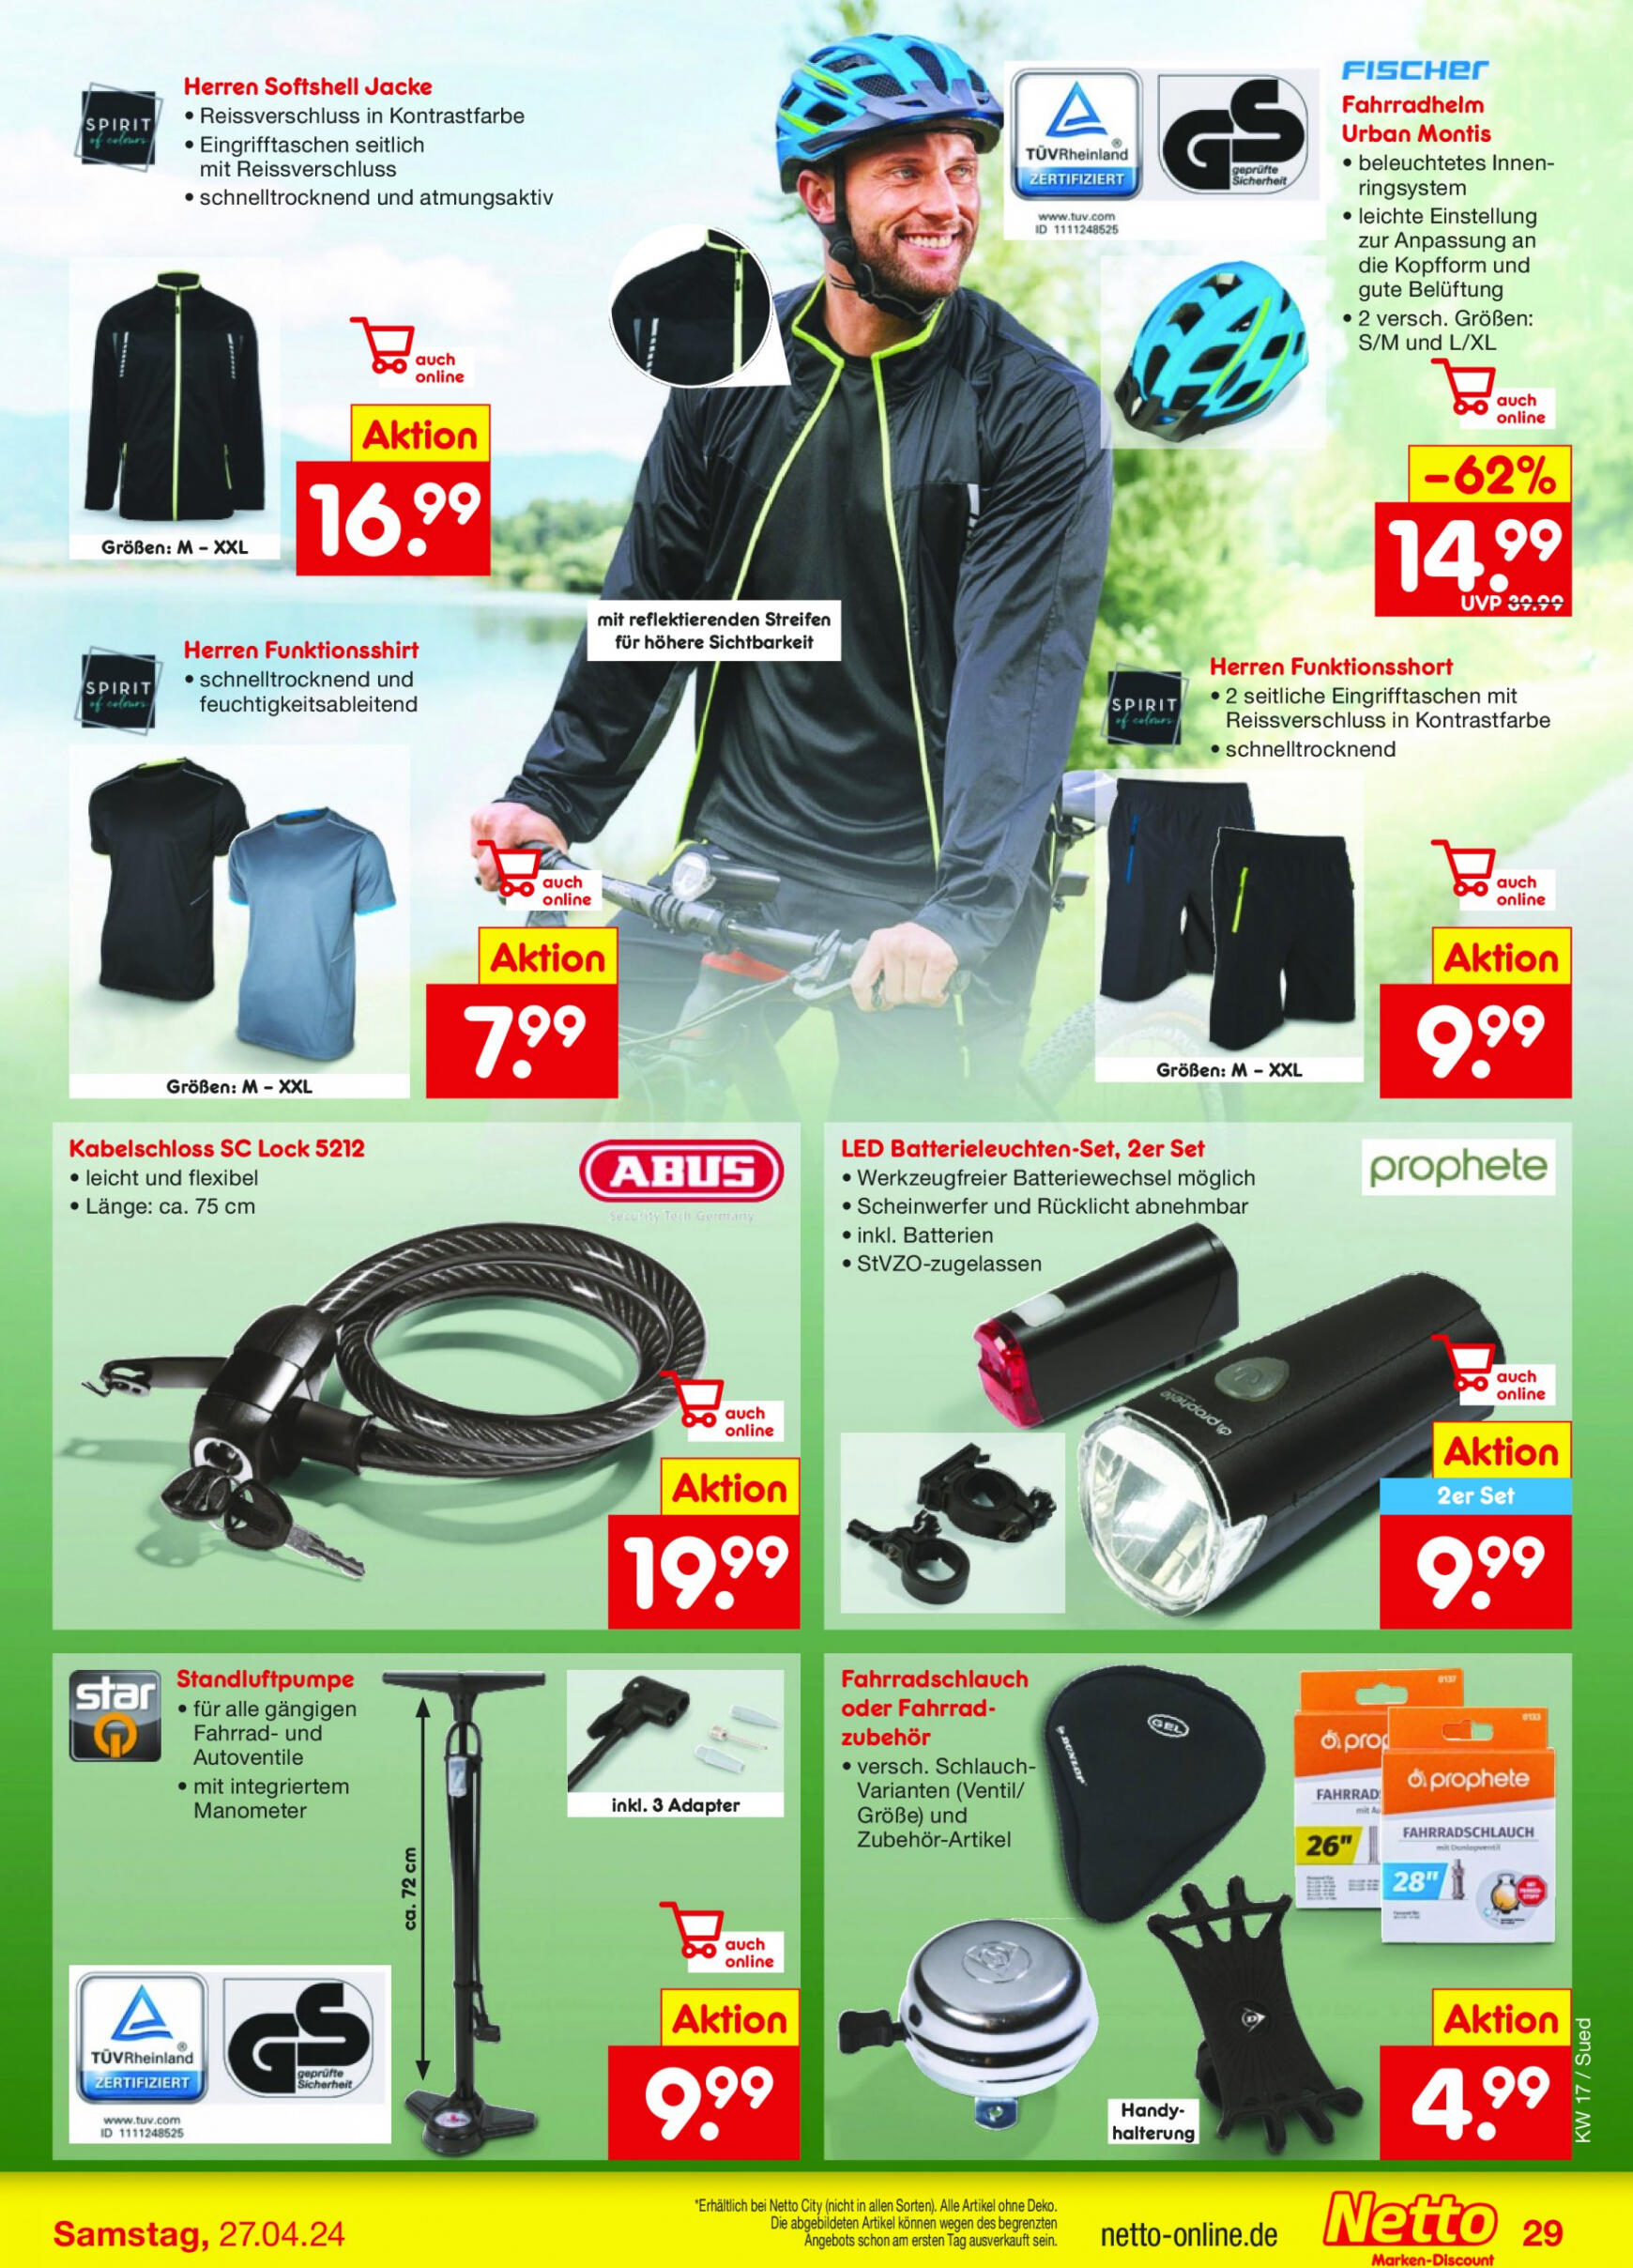 netto - Flyer Netto aktuell 22.04. - 27.04. - page: 31